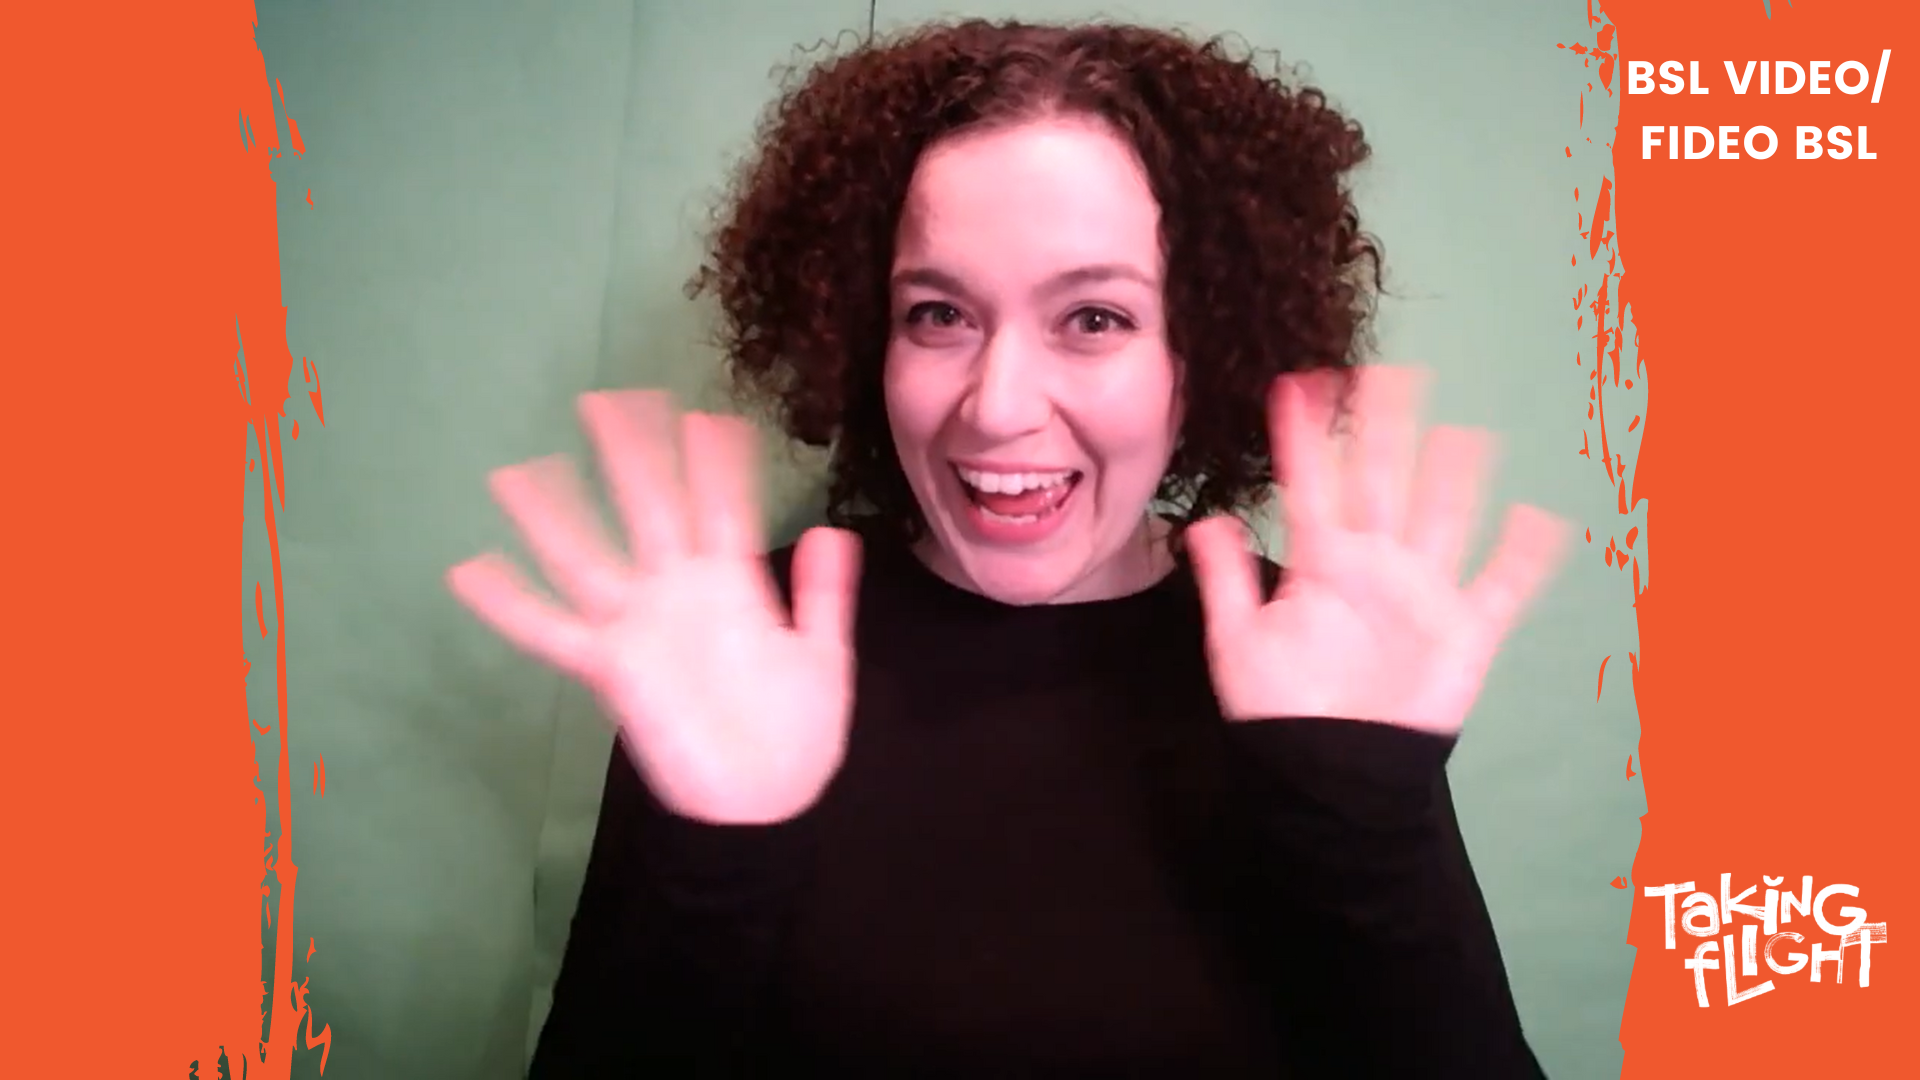 Steph, a woman with curly dark hair signs in a still from a BSL video